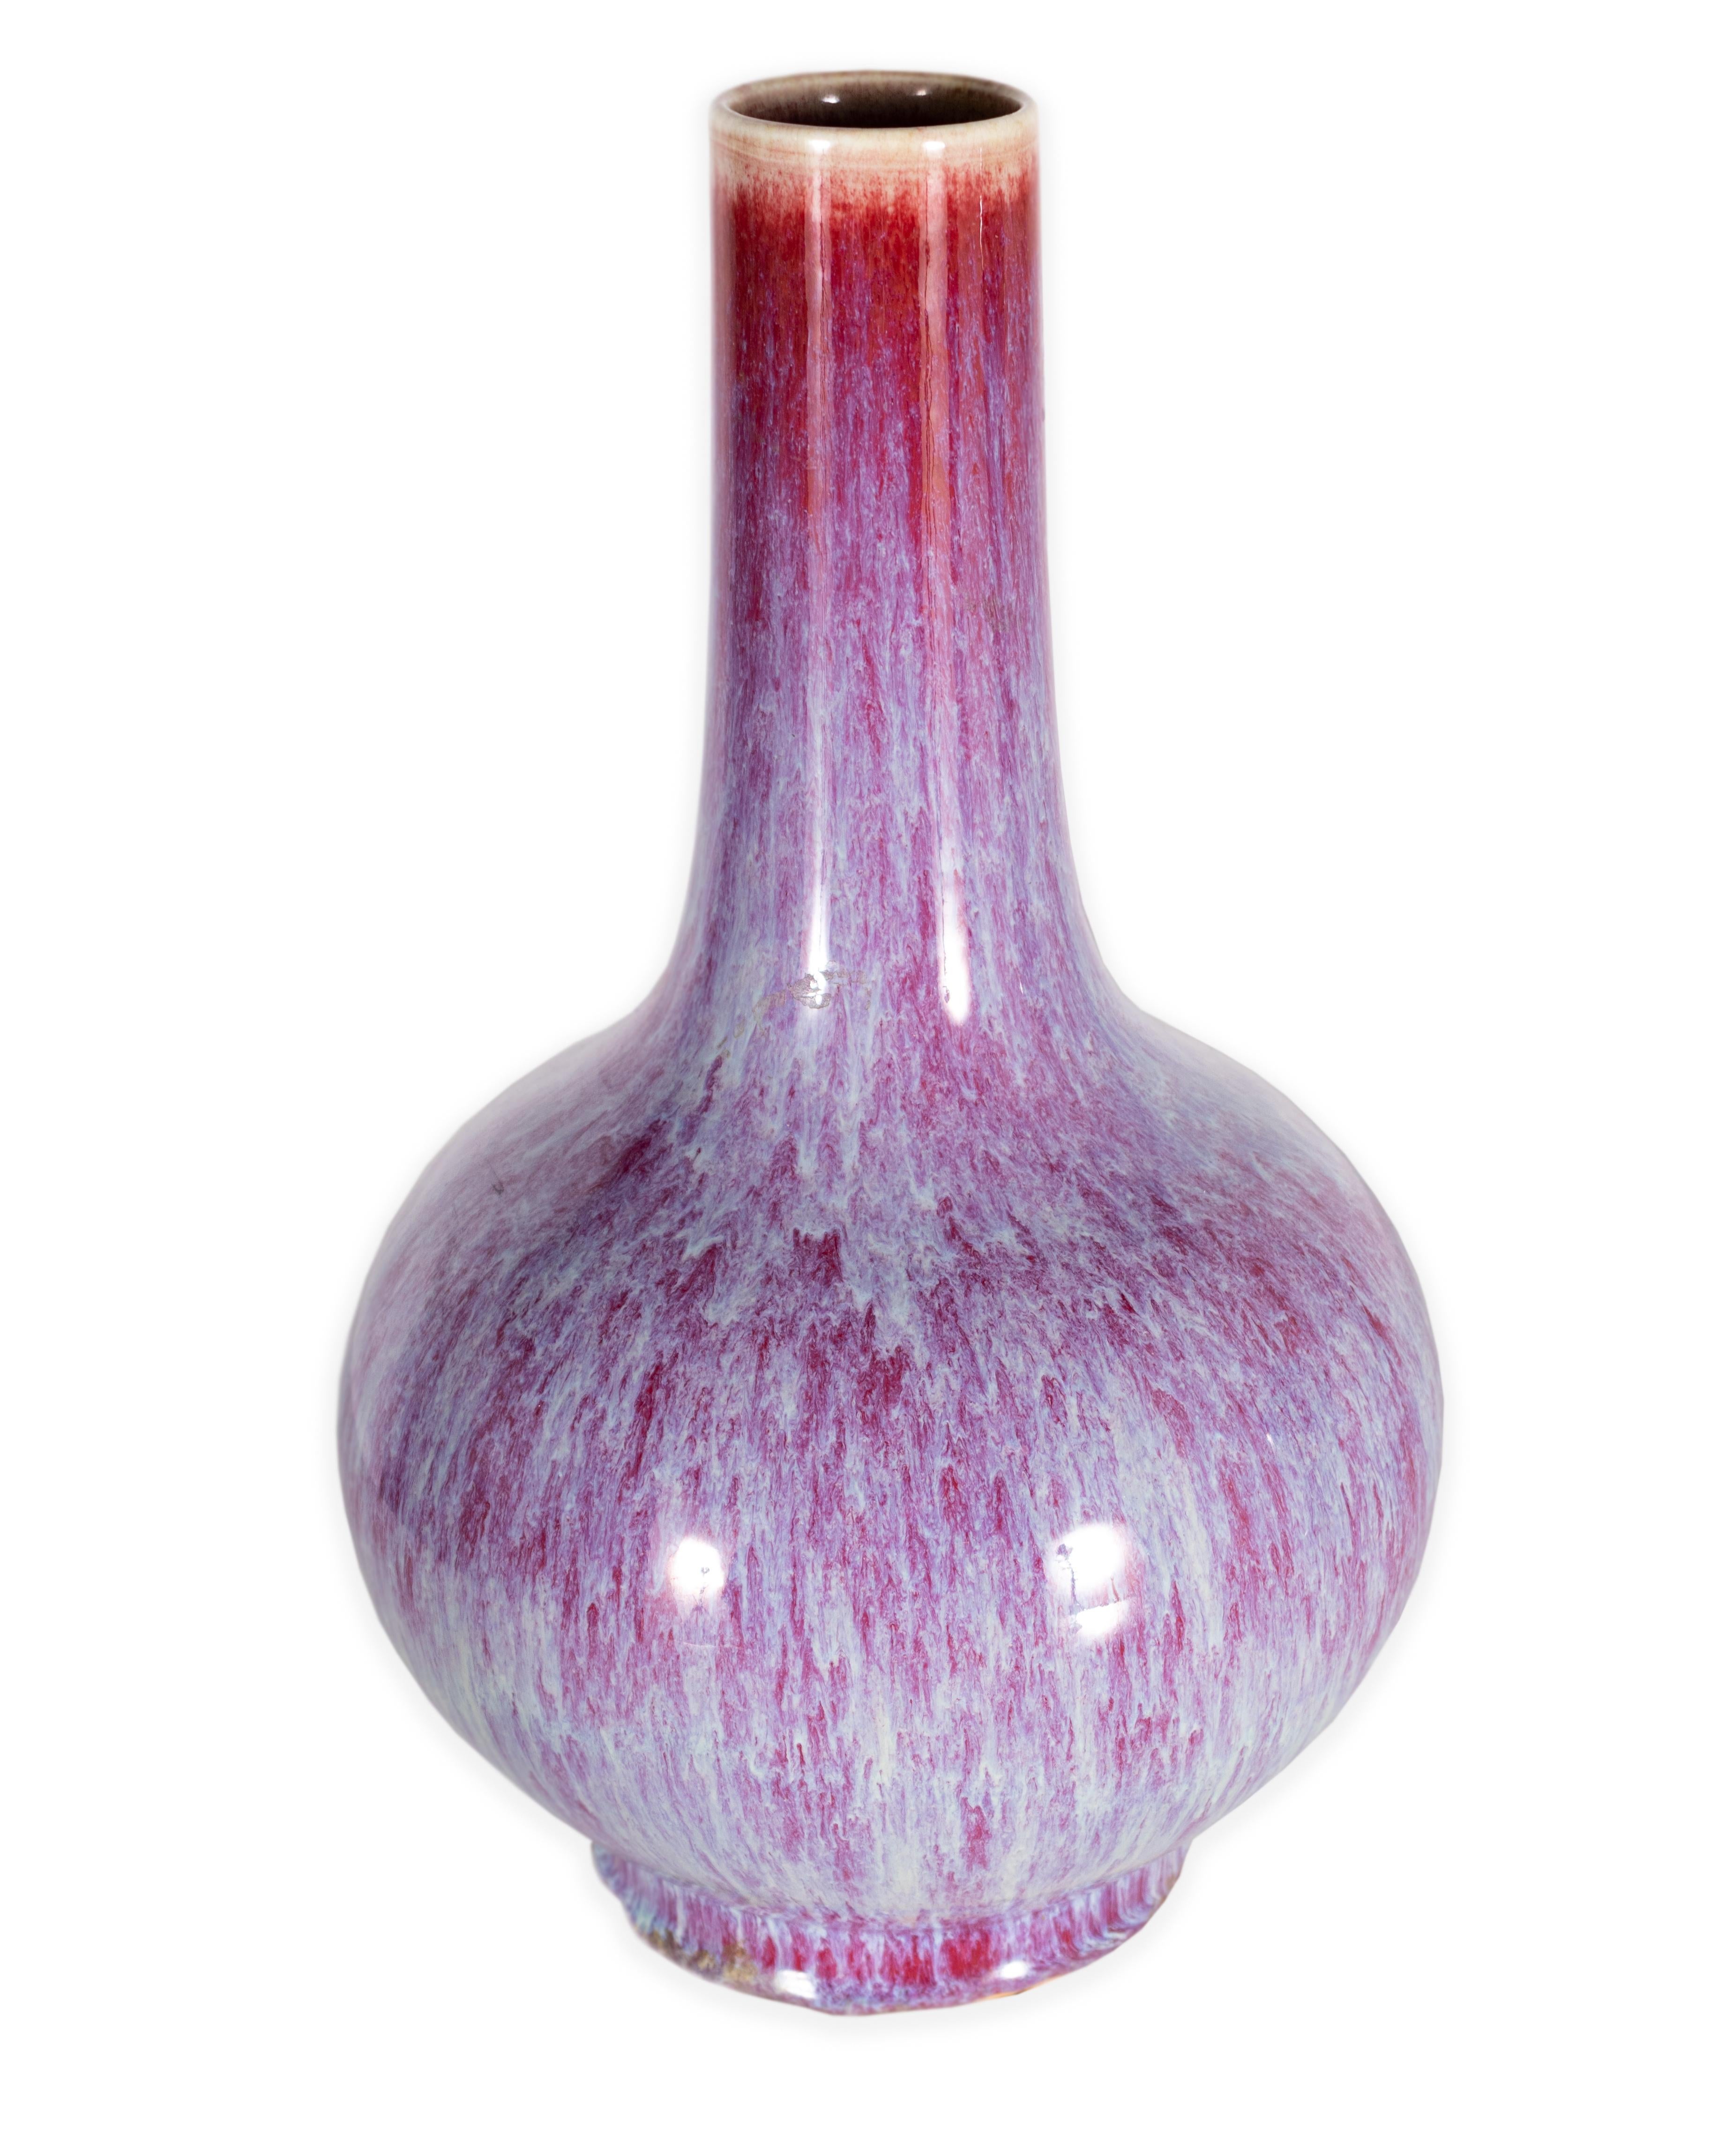 Variegated oxblood glaze ceramic Chinese vase. In my organic, contemporary, vintage and mid-century modern style.

This piece is a part of Brendan Bass’s one-of-a-kind collection, Le Monde. French for “The World”, the Le Monde collection is made up